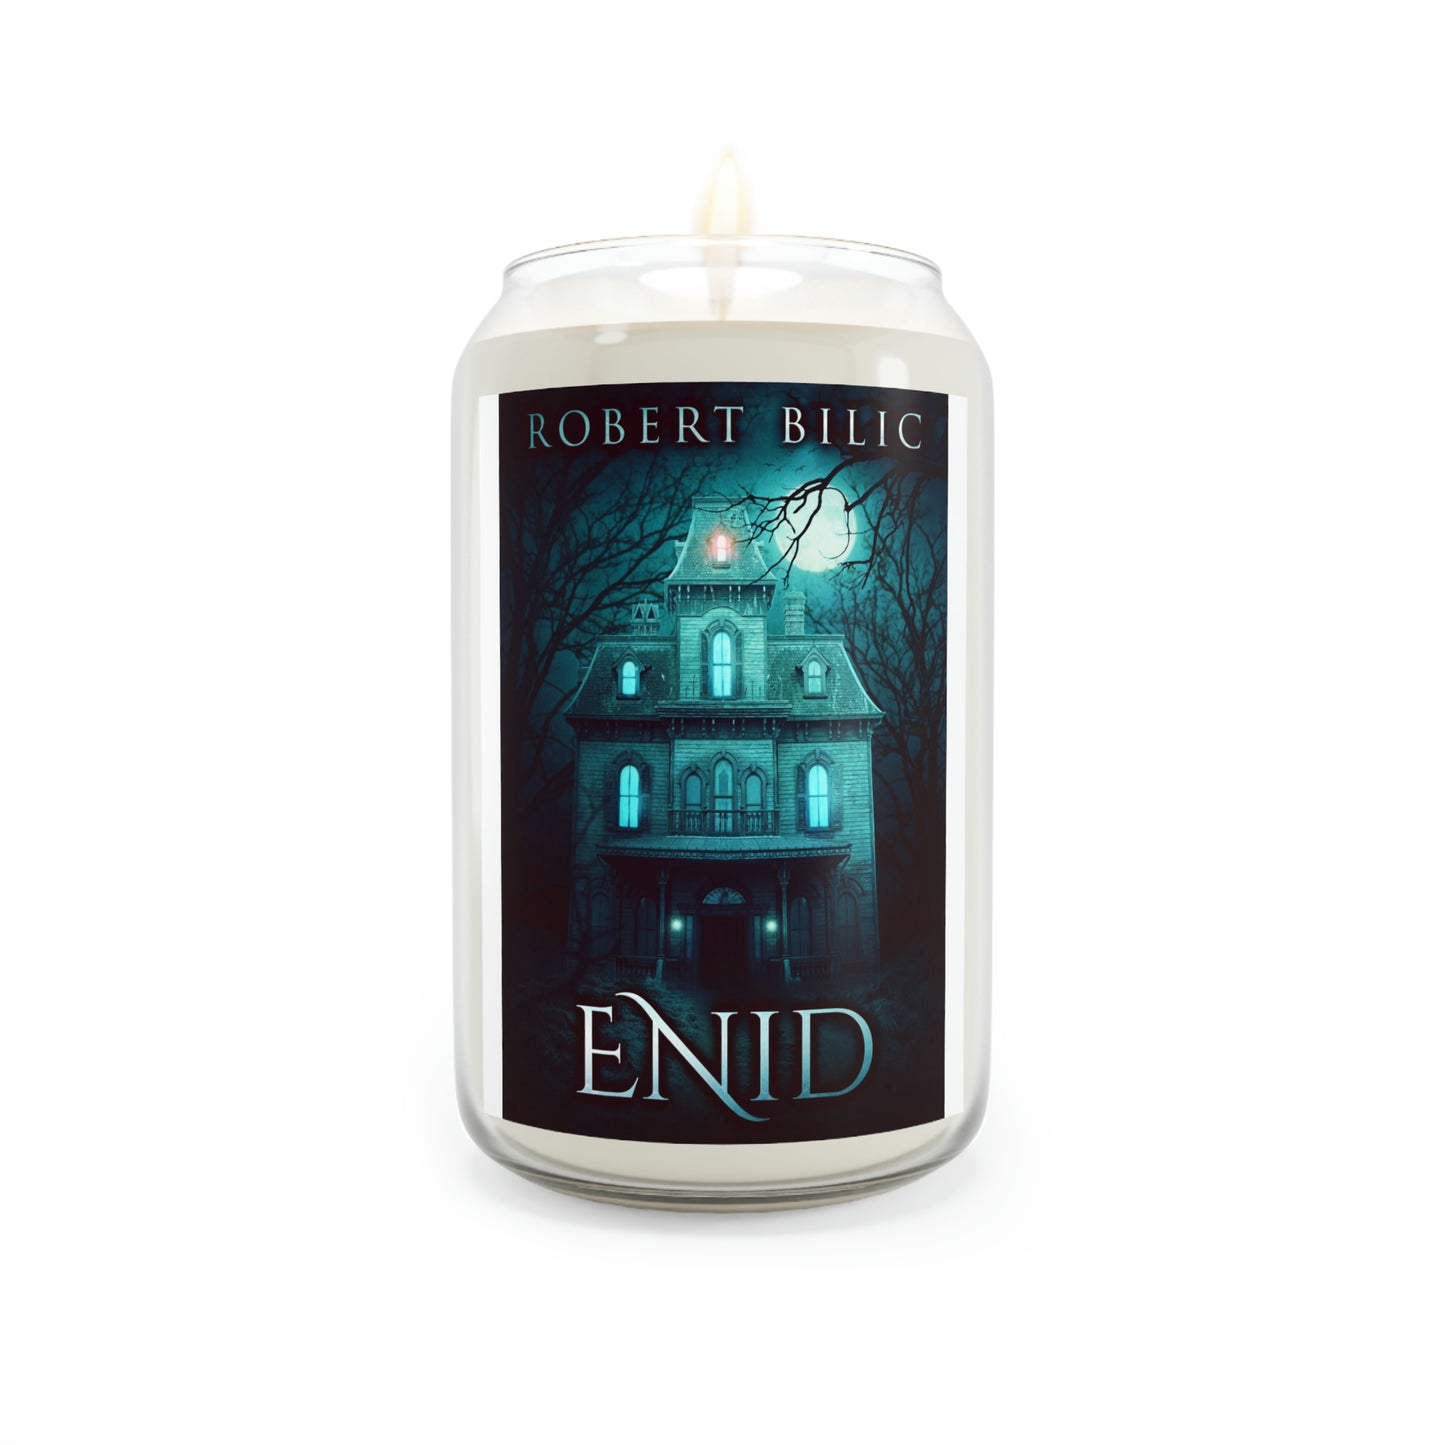 Enid - Scented Candle